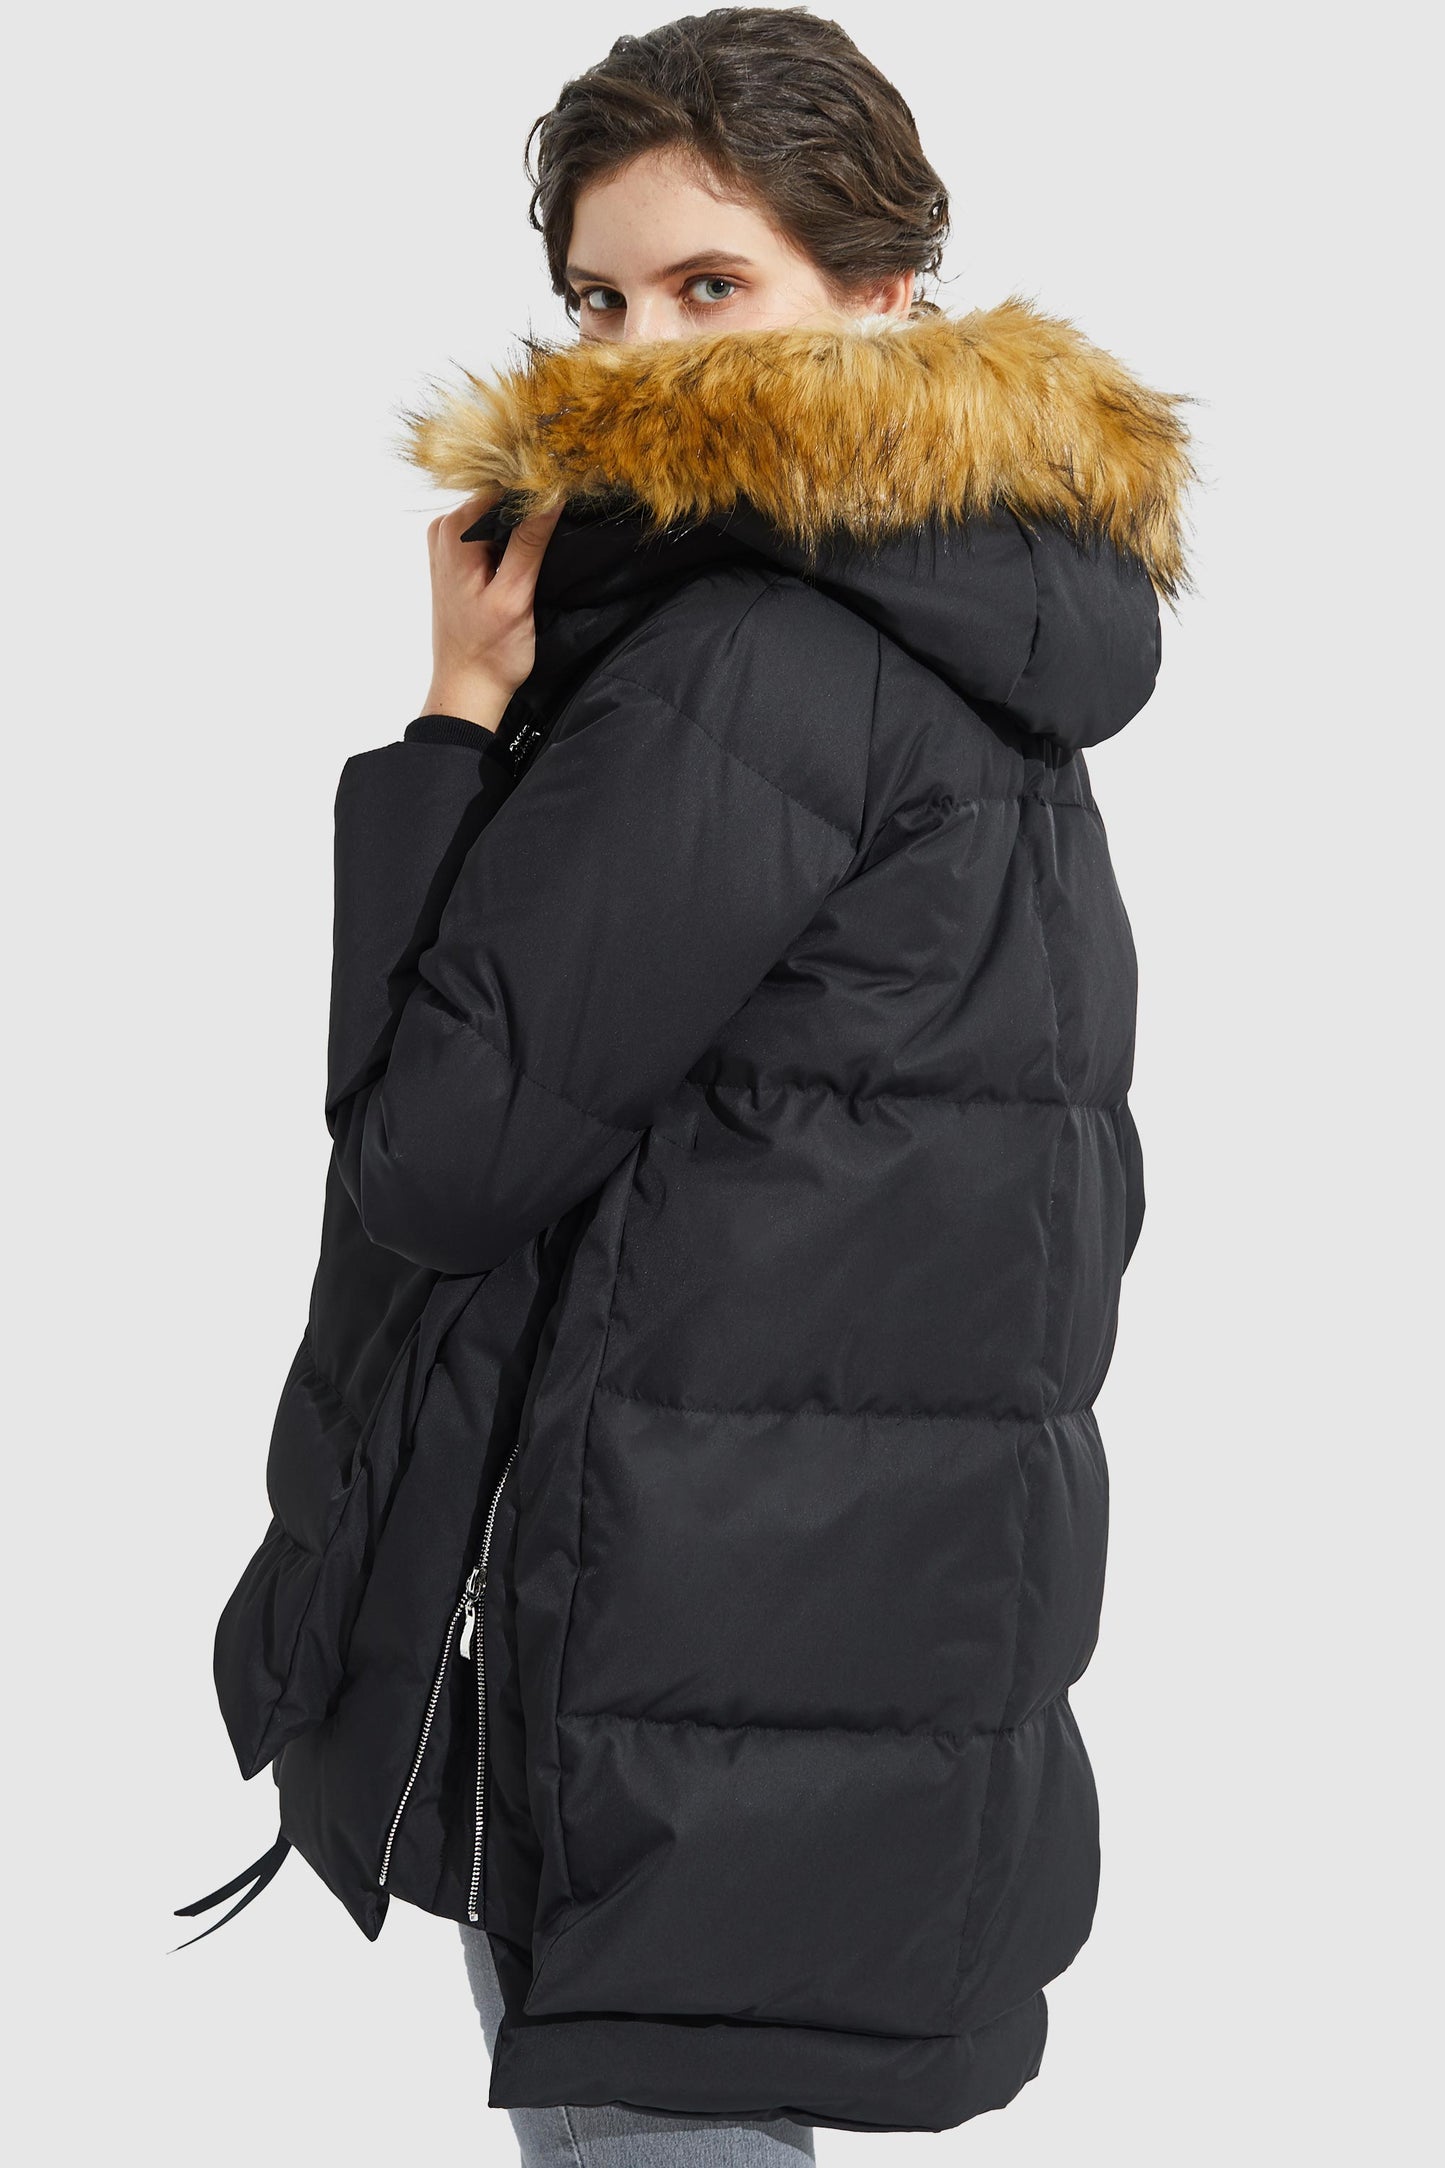 092 Universe Classics Zip front Thickened Down Jacket with Faux Fur Hood